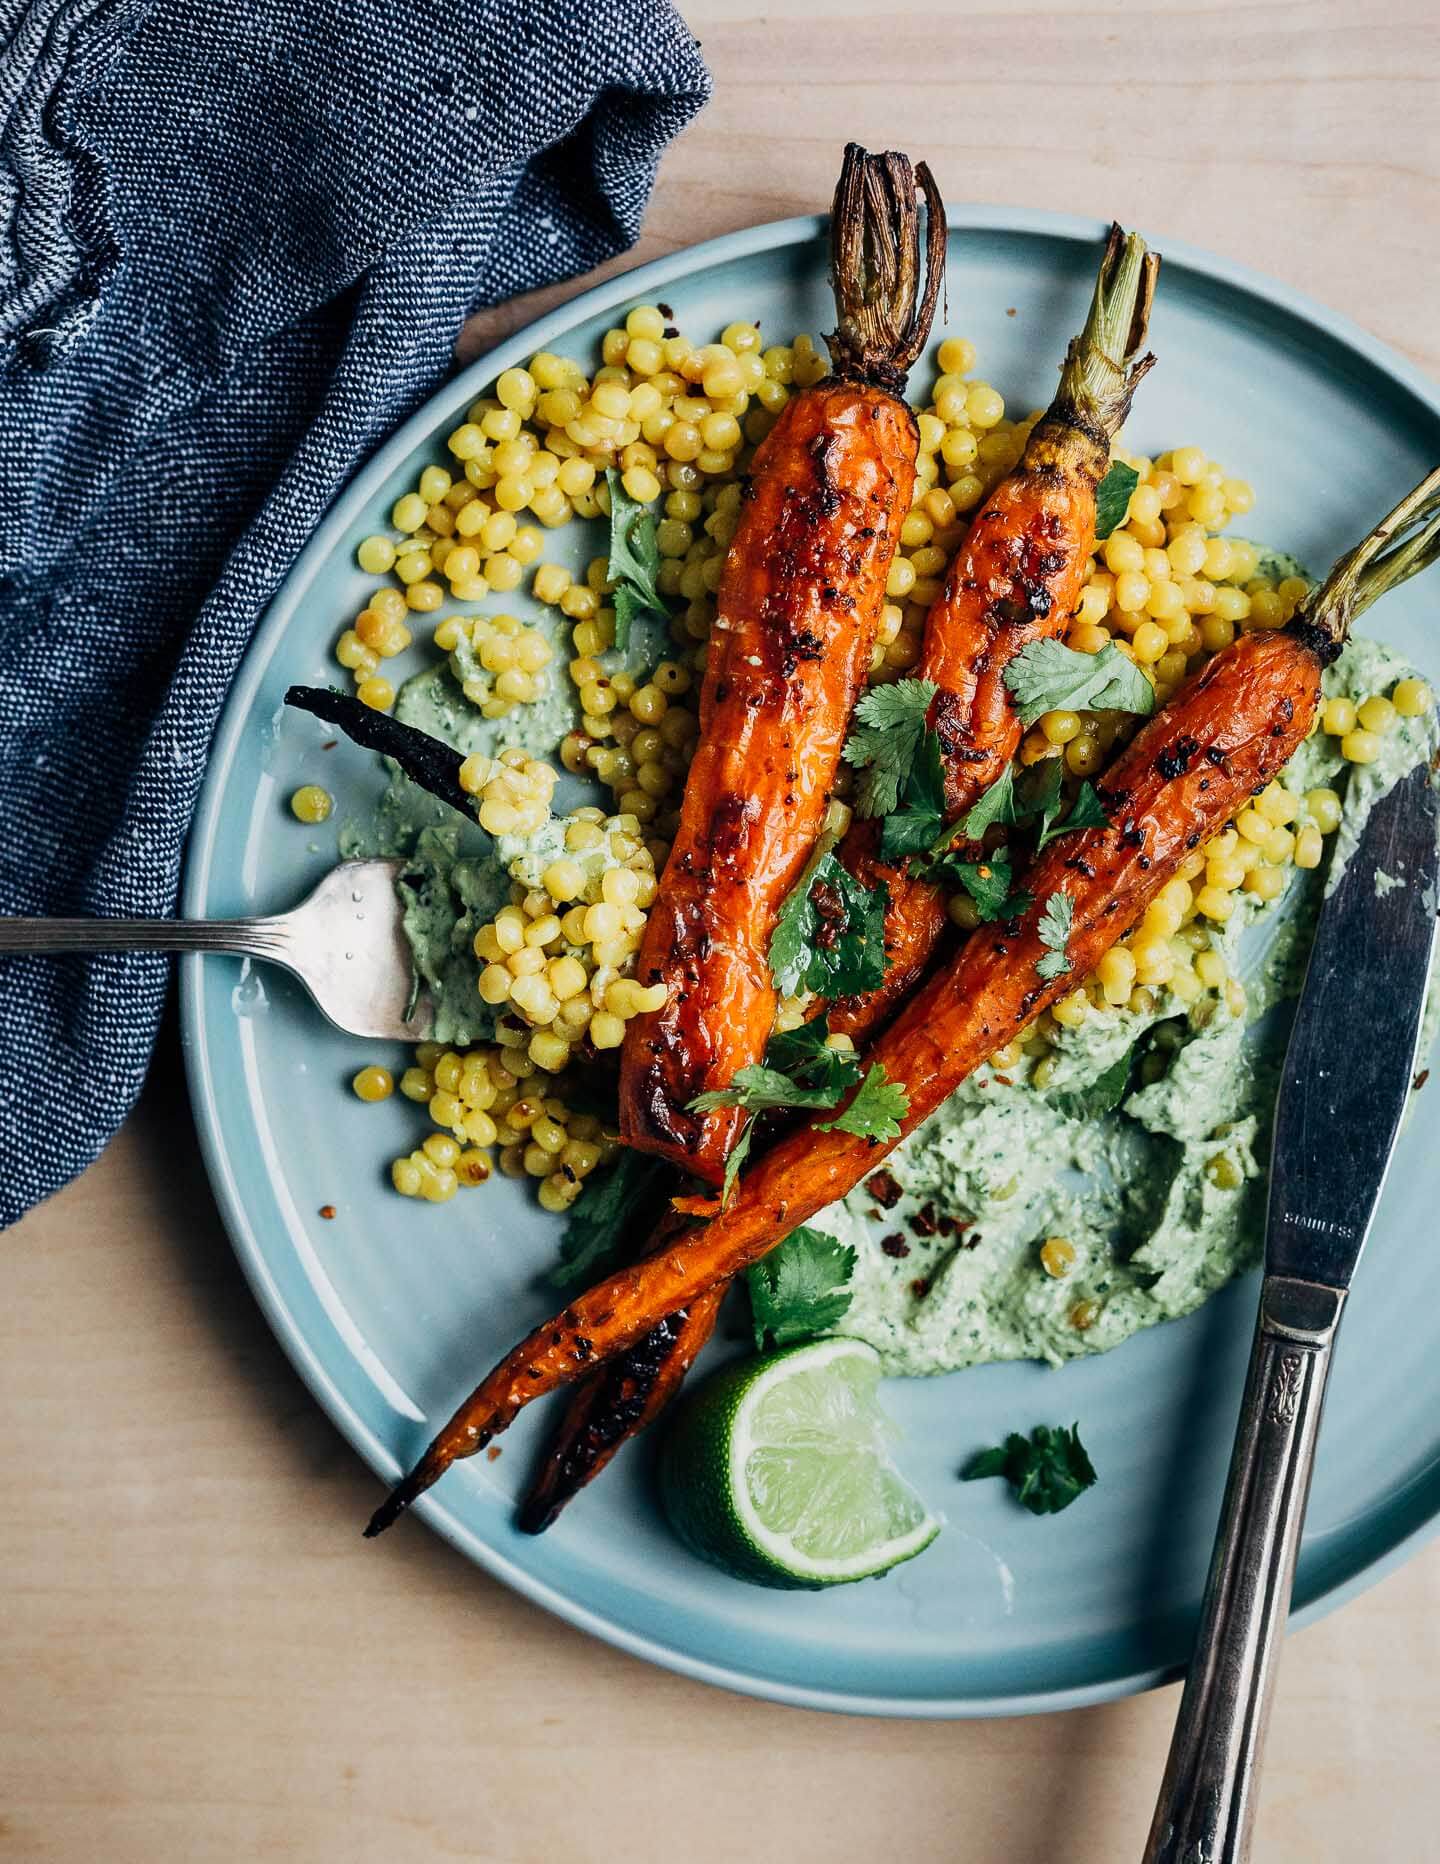 A close-up view of a plate with roasted carrots, green tahini, and couscous. A fork is prepped with a bite of food and there’s a knife alongside. 